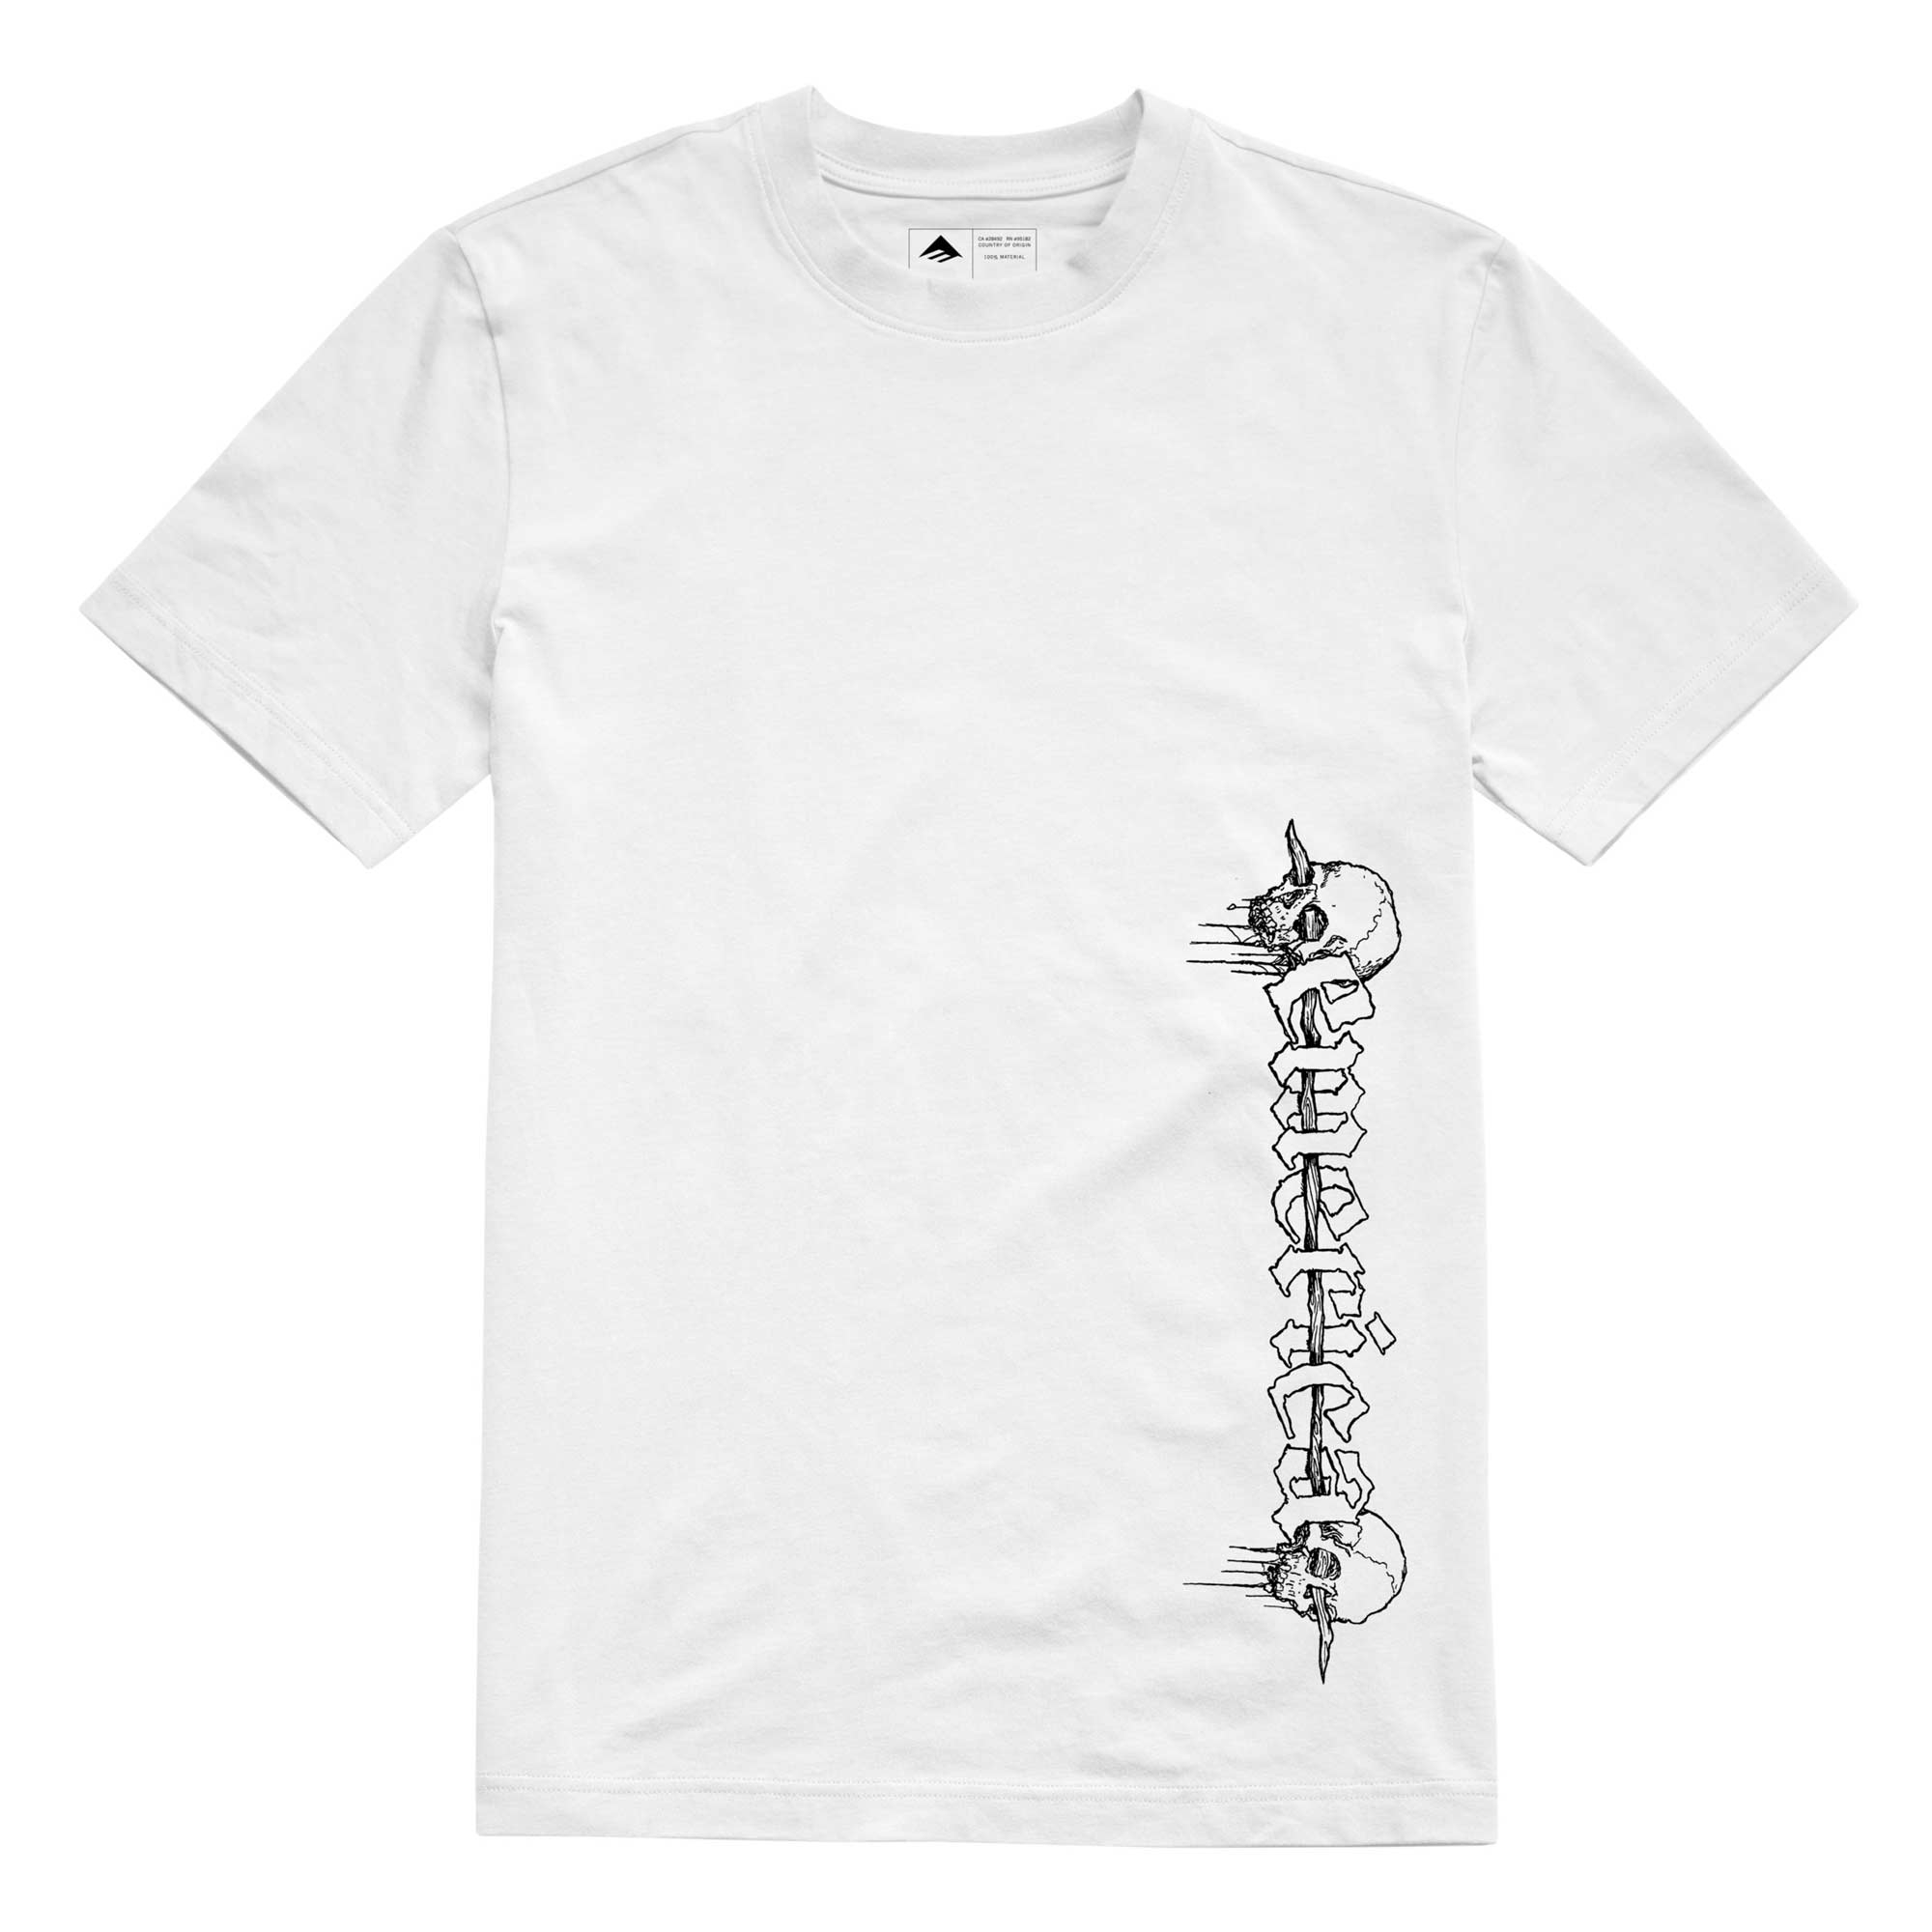 EMERICA T-Shirt SPIKED S/S, white